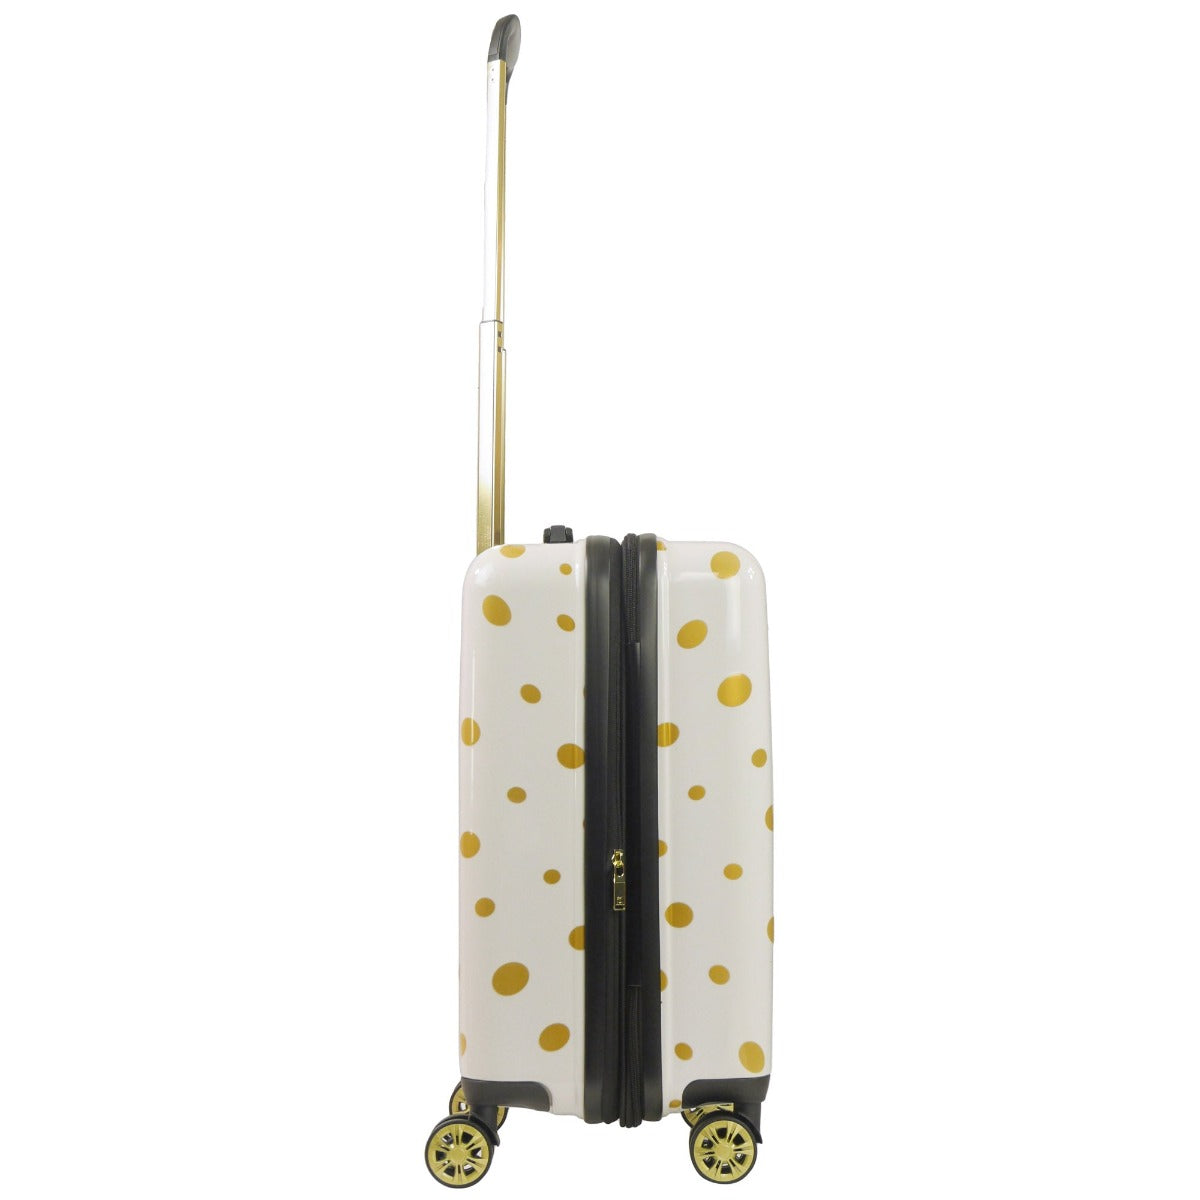 Ful Impulse Mixed Dots hardside spinner 22" carry-on luggage white gold suitcase